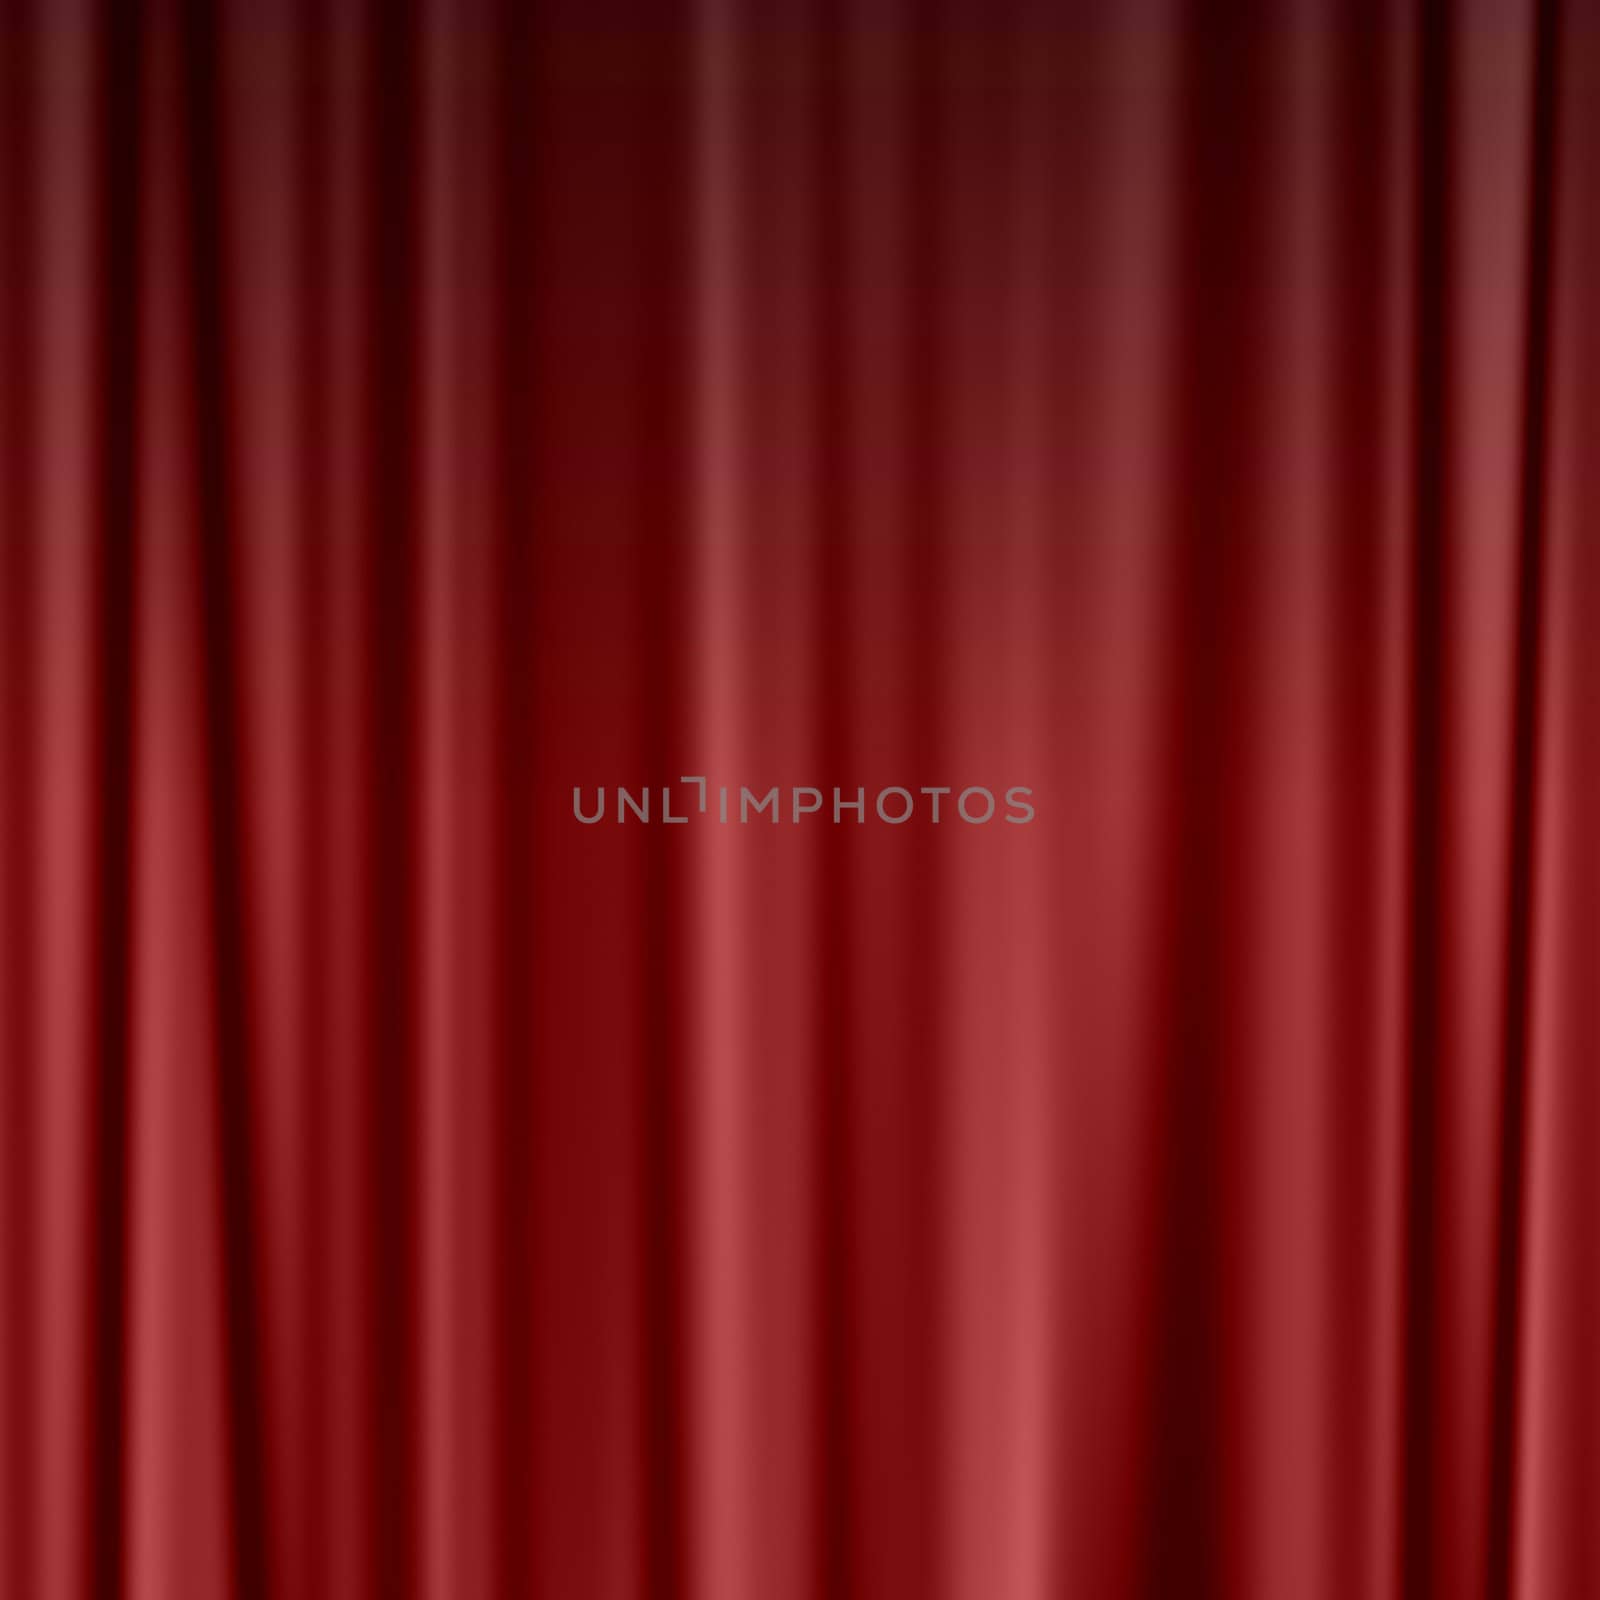 large red theatre curtain as a background